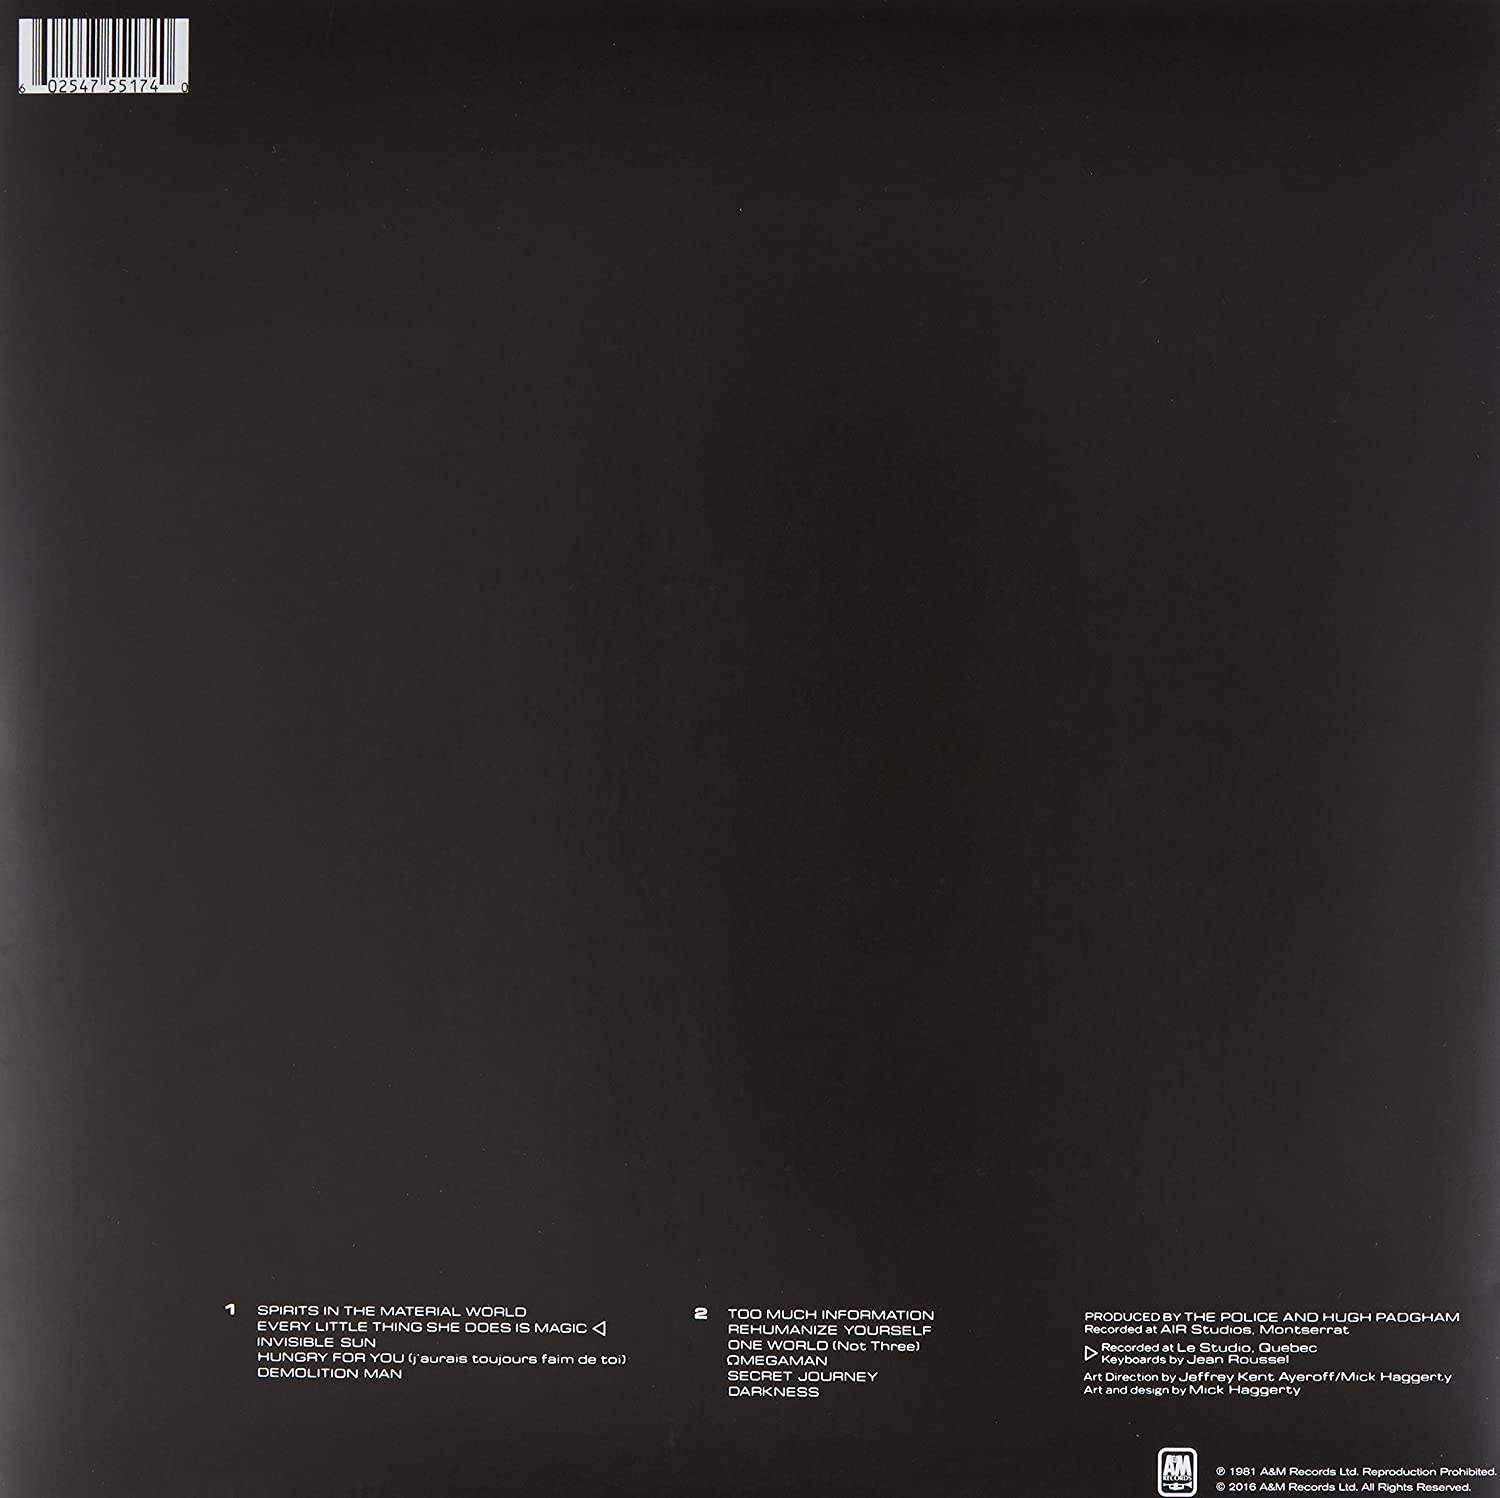 The-Police-Ghost-In-the-Machine-vinyl-record-album-back